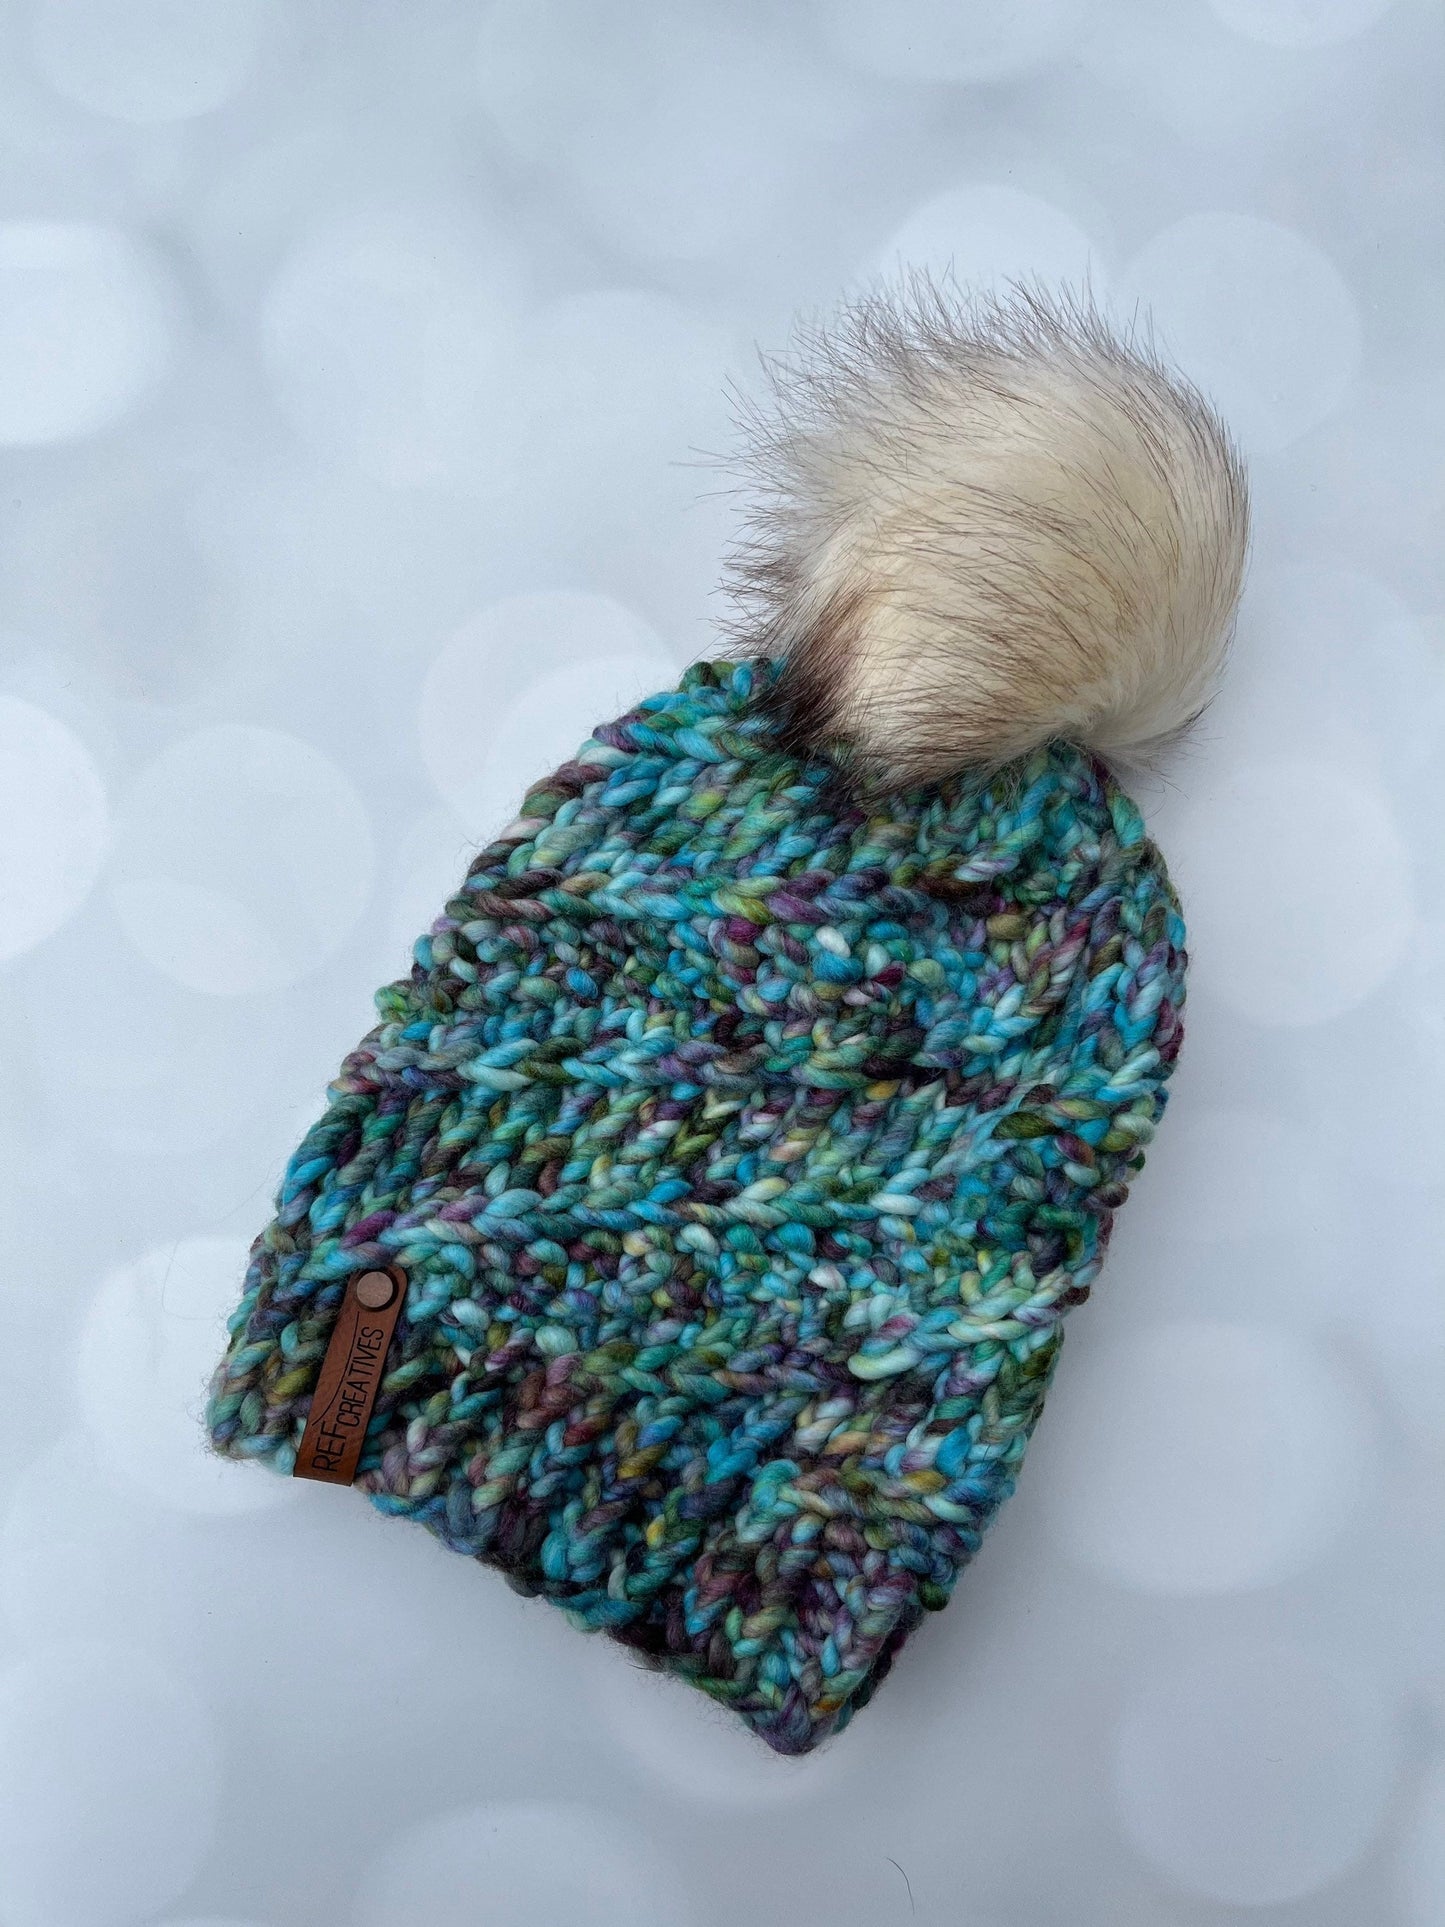 Luxury Multicolor Merino Wool Knit Hat - Cool Confetti Hand Knit Hat with Hand Dyed Yarn